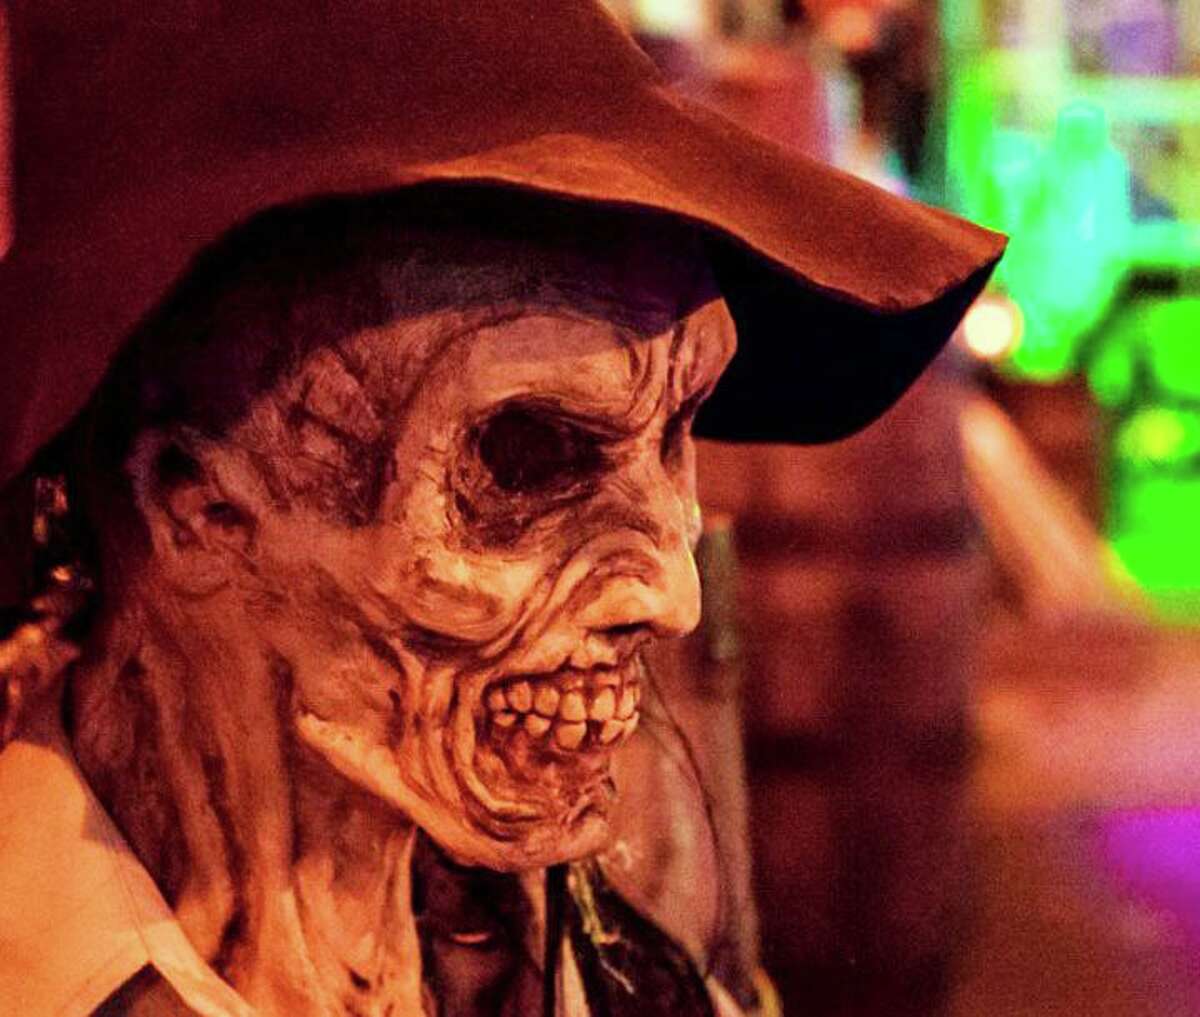 Powder Ridge Mountain Park and Resort in Middlefield will welcome a new Halloween attraction from Graveyard Productions in late September.